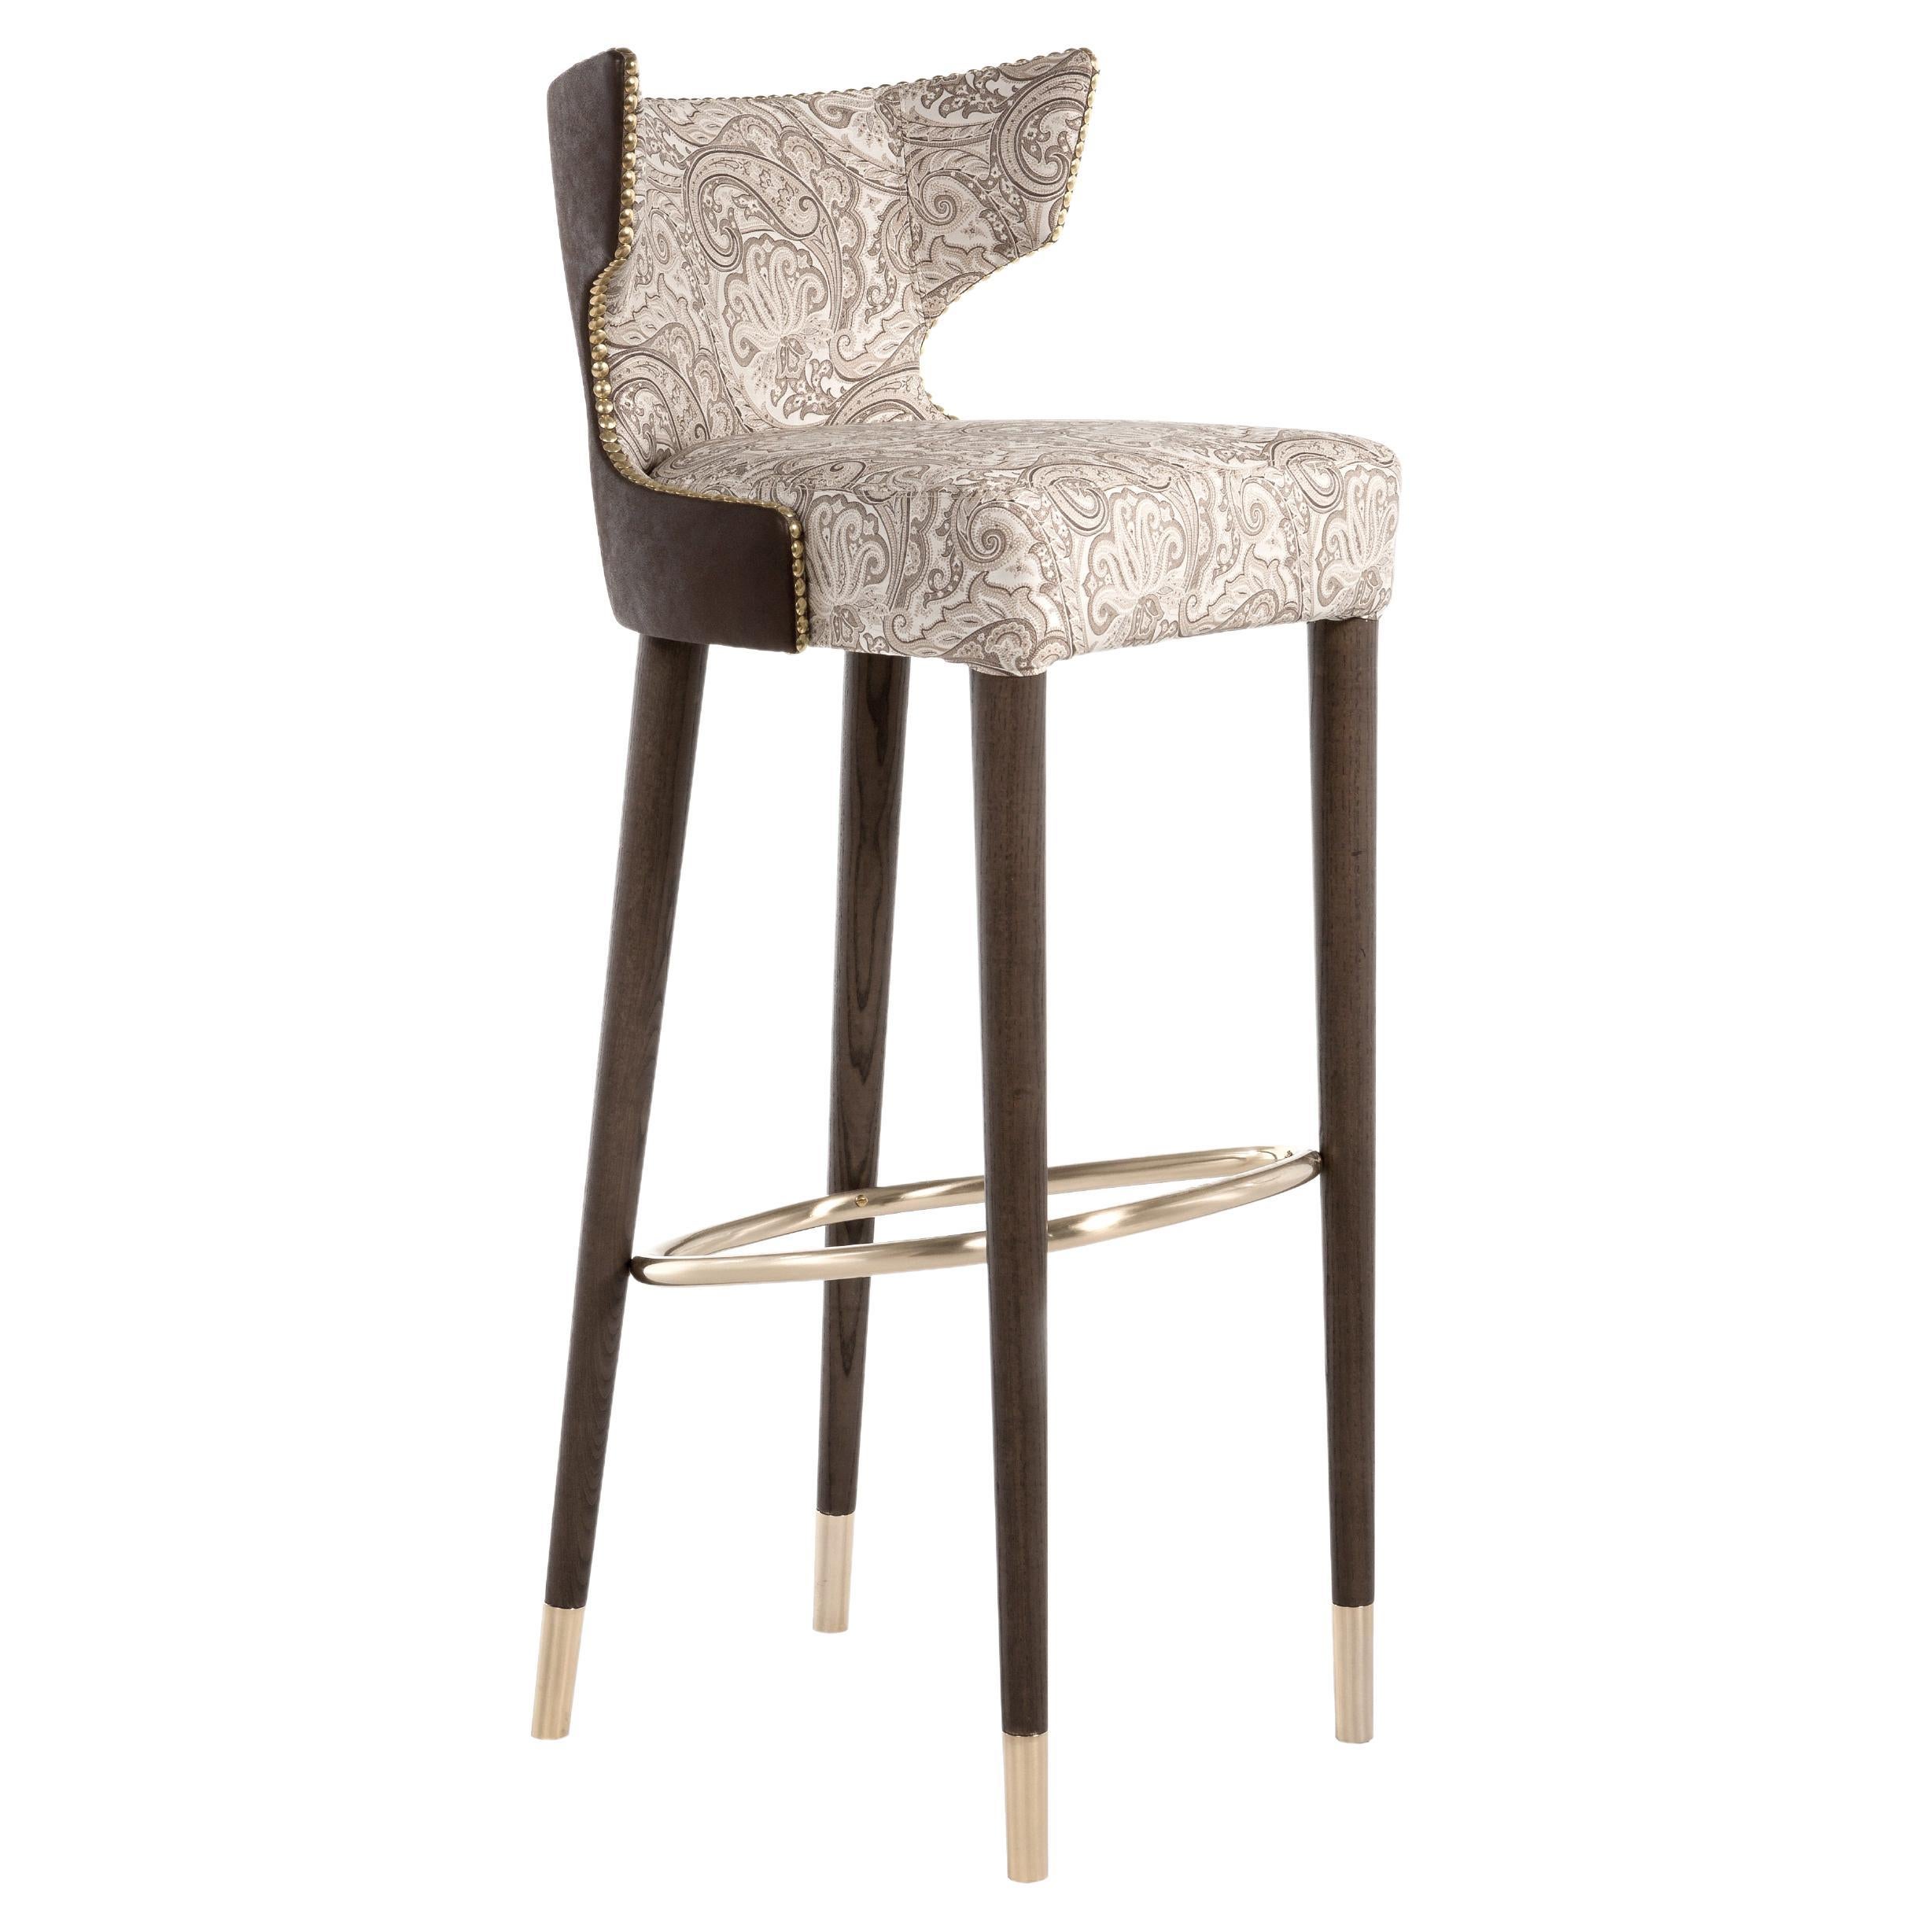 Contemporary Bar Stool Customizable, Wood Frame and Brass Details, Made in Italy For Sale